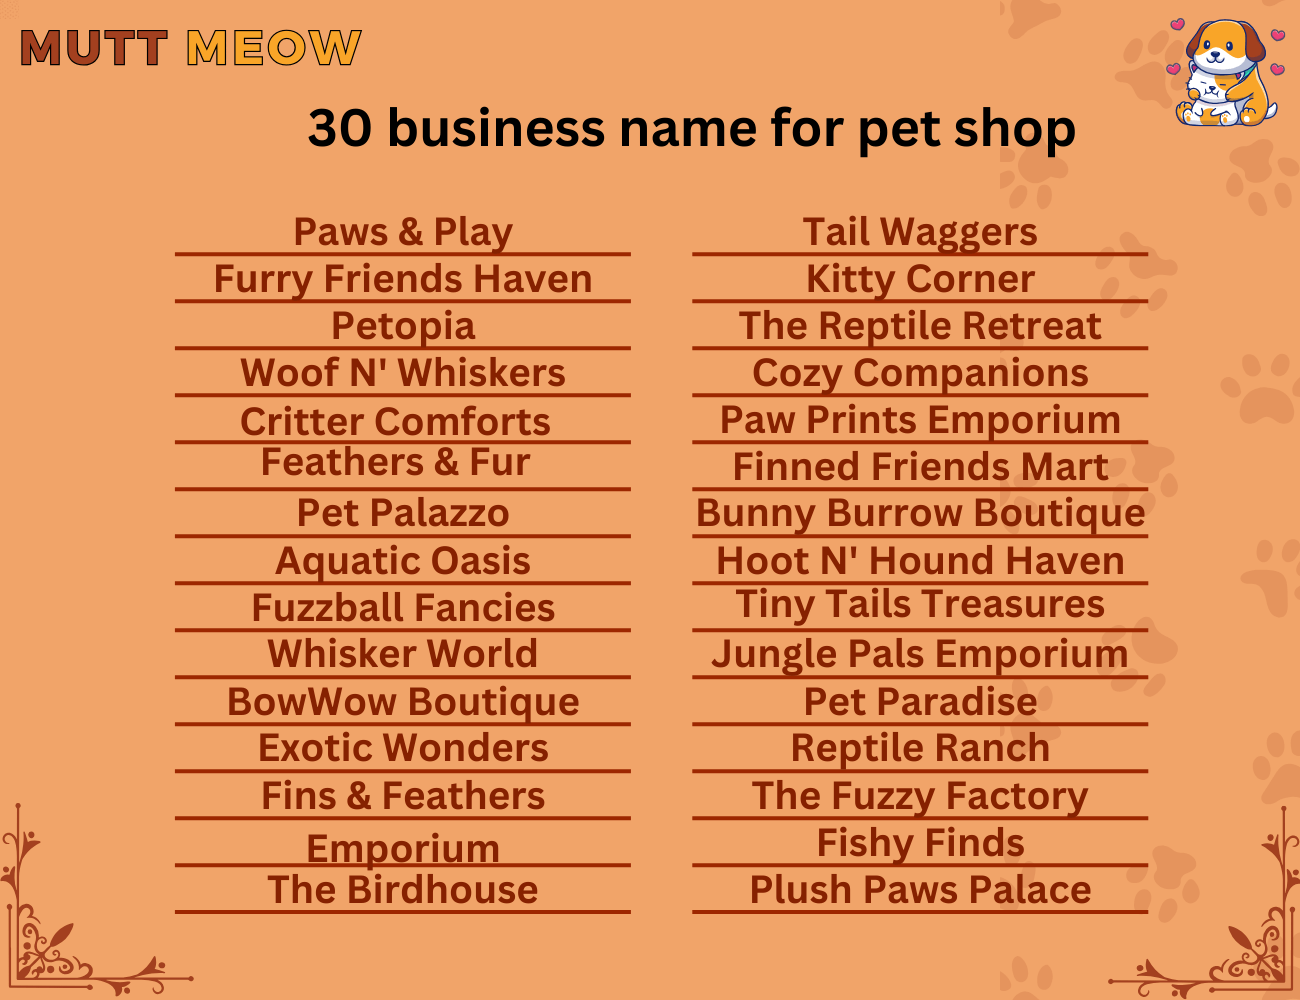 30 business name for pet shop